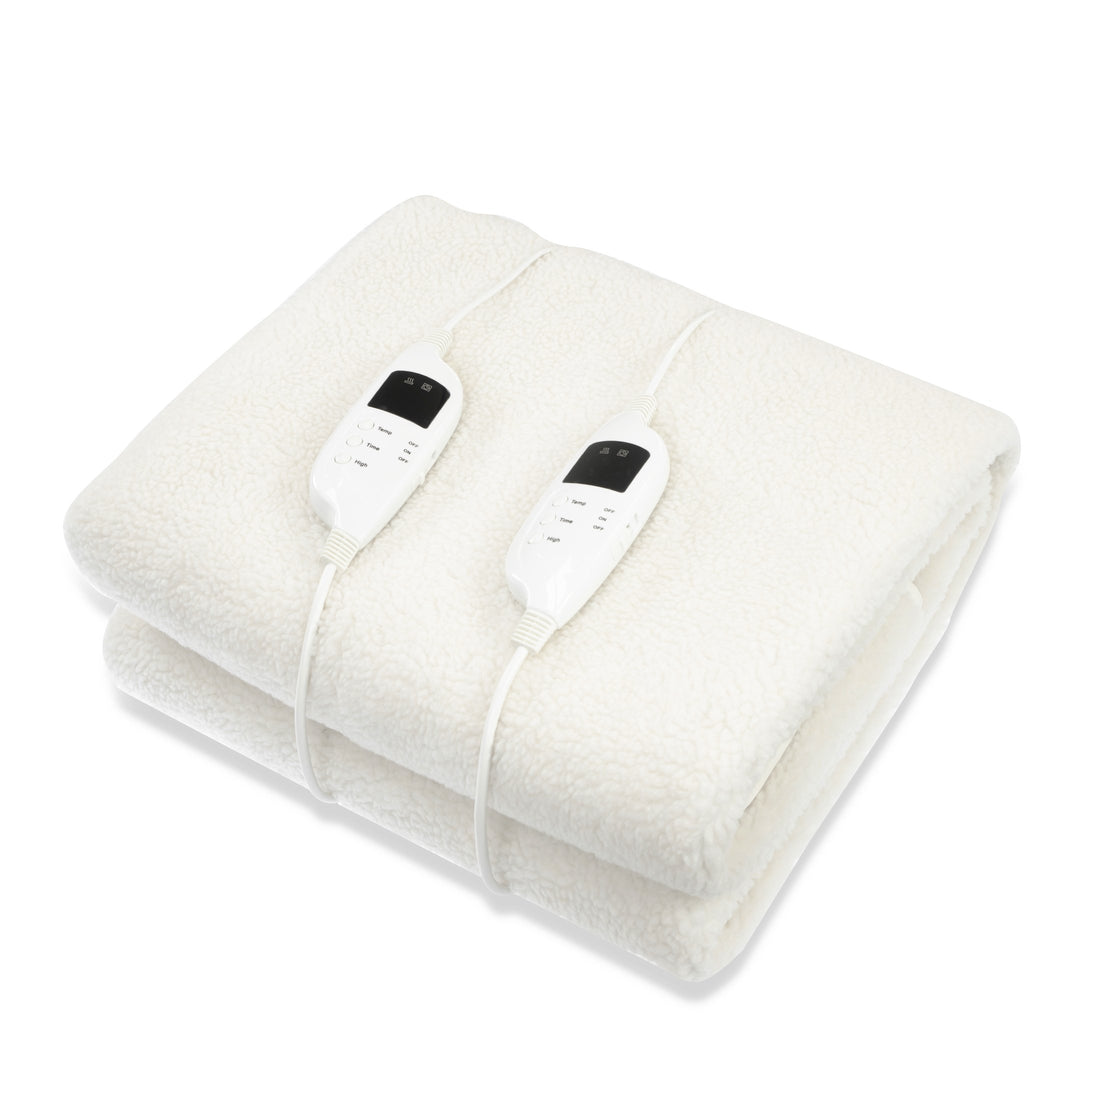 Laura Hill Heated Electric Blanket Double Size Fitted Fleece Underlay Winter Throw - White-Electric Throw Blanket-PEROZ Accessories